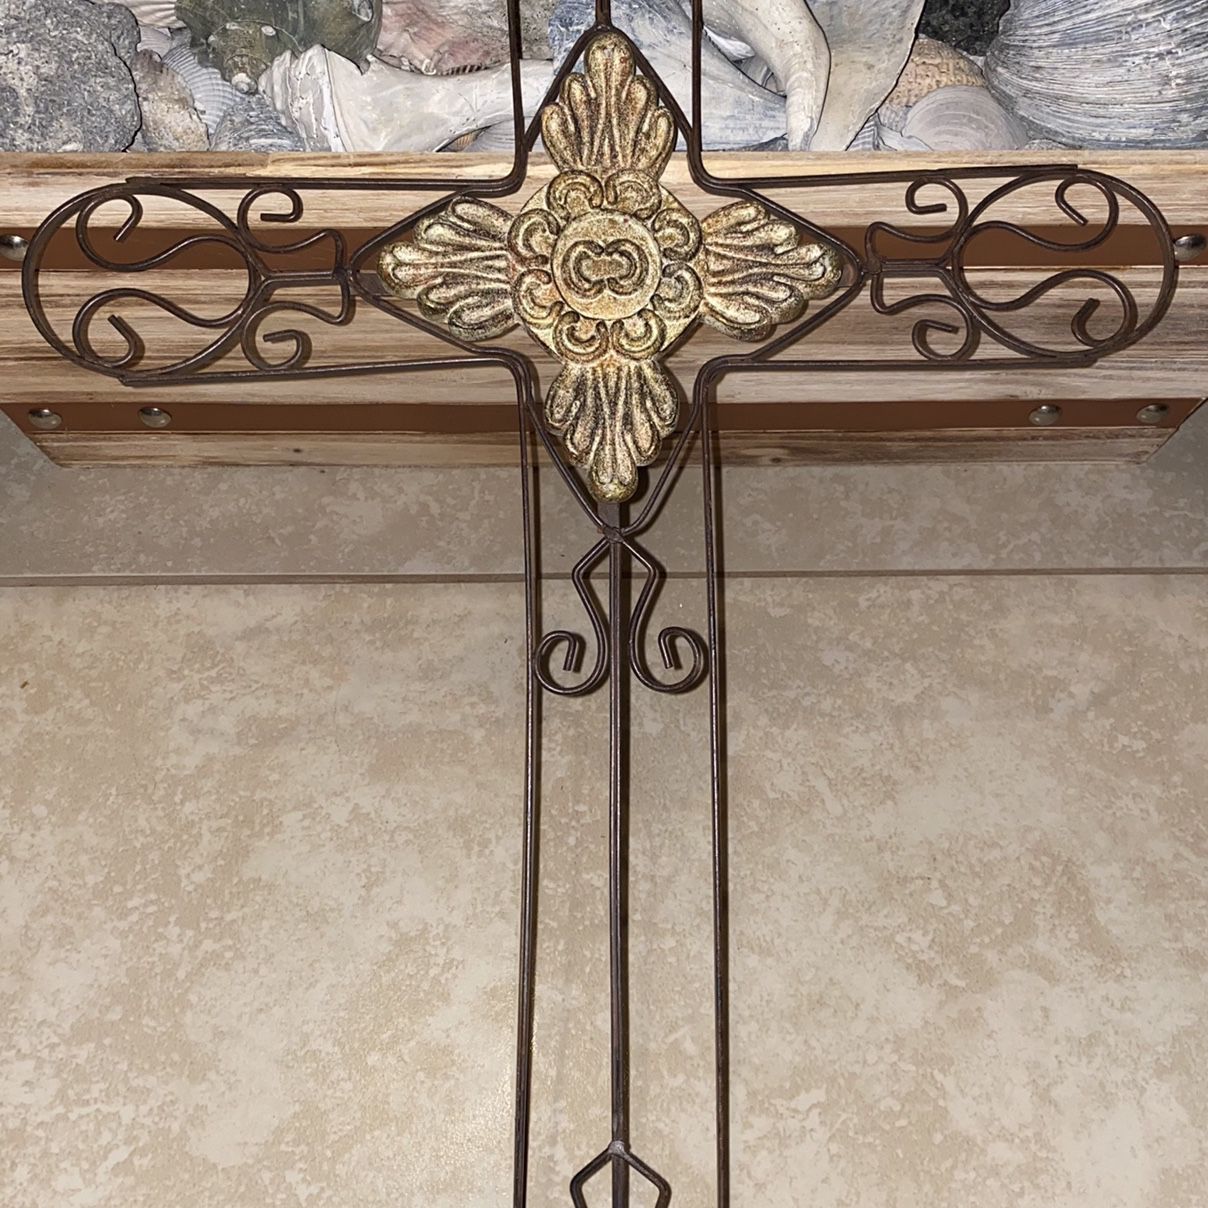 3 Large Decorative Carved Crosses Dark Finish For Wall Hanging 24”L